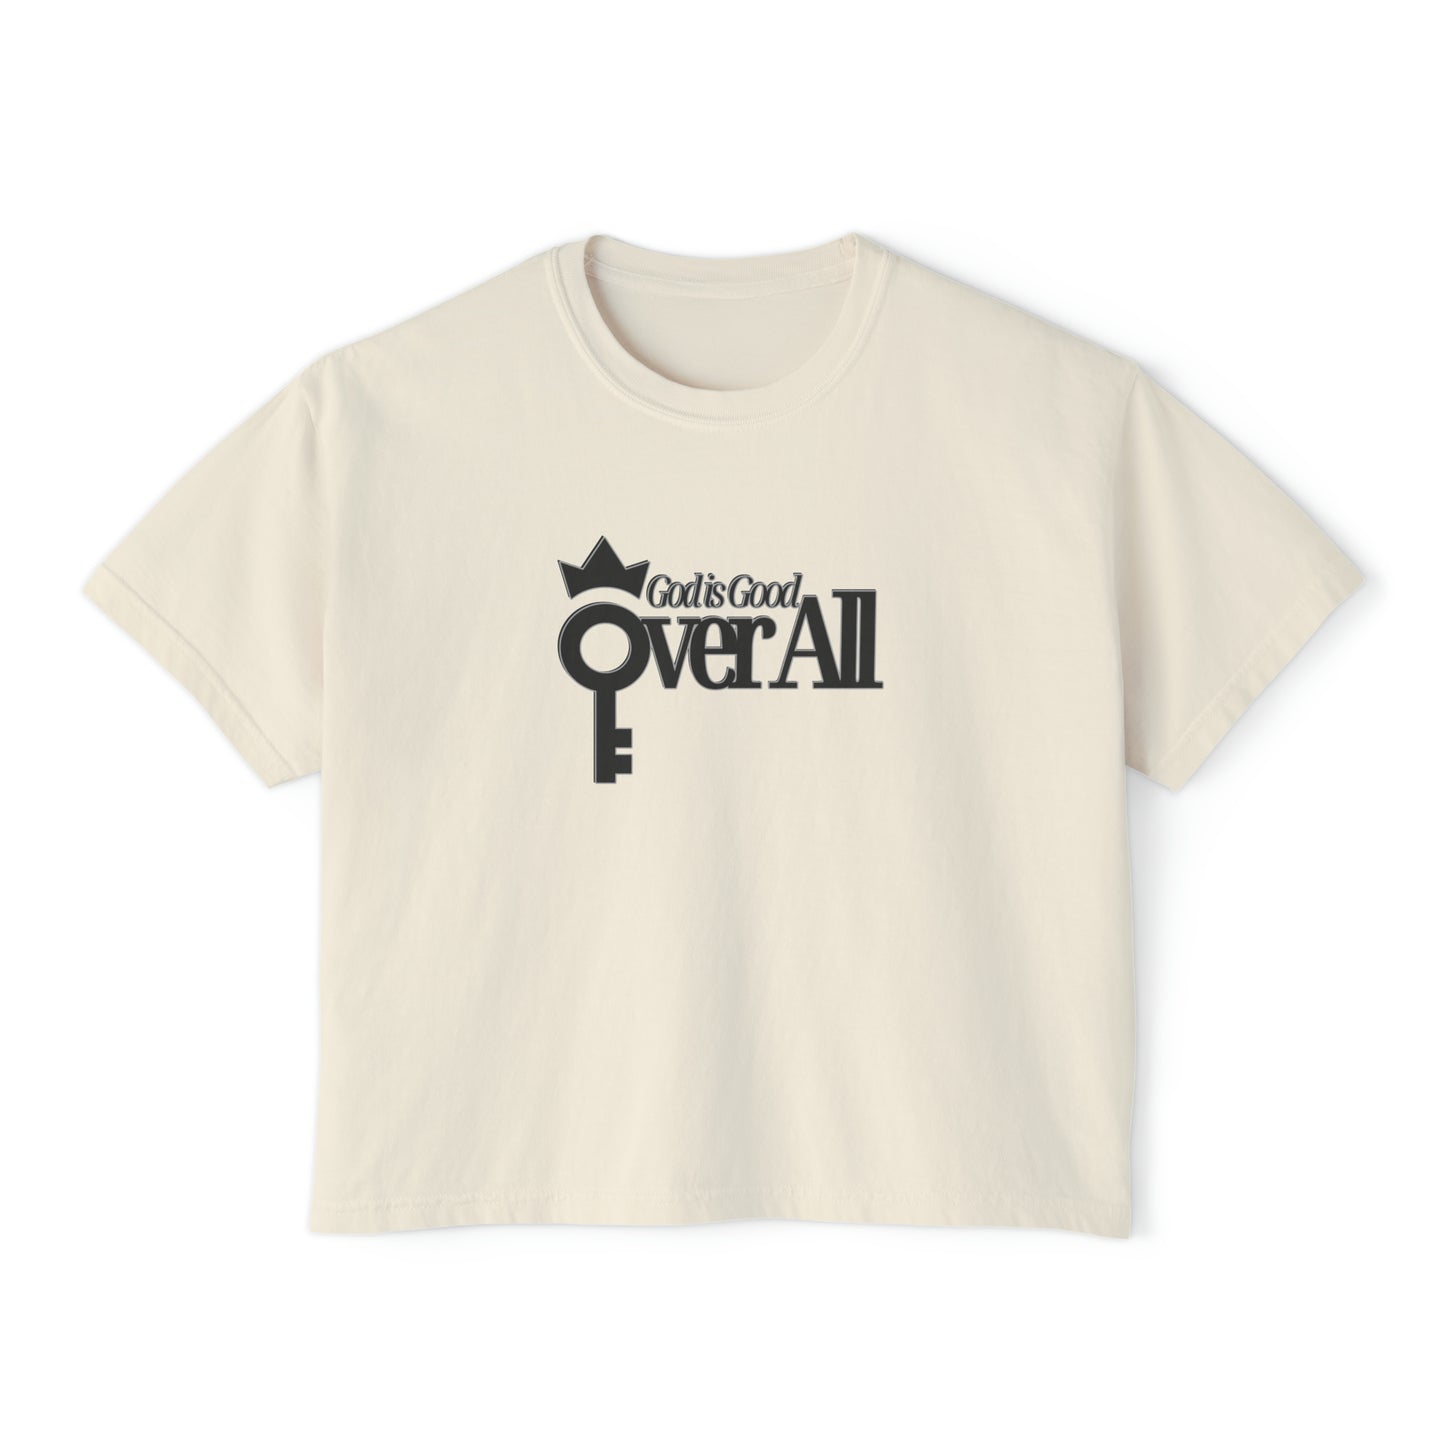 Oh Yeah Divine Goodness: God is Good Over All Women's Boxy Tee